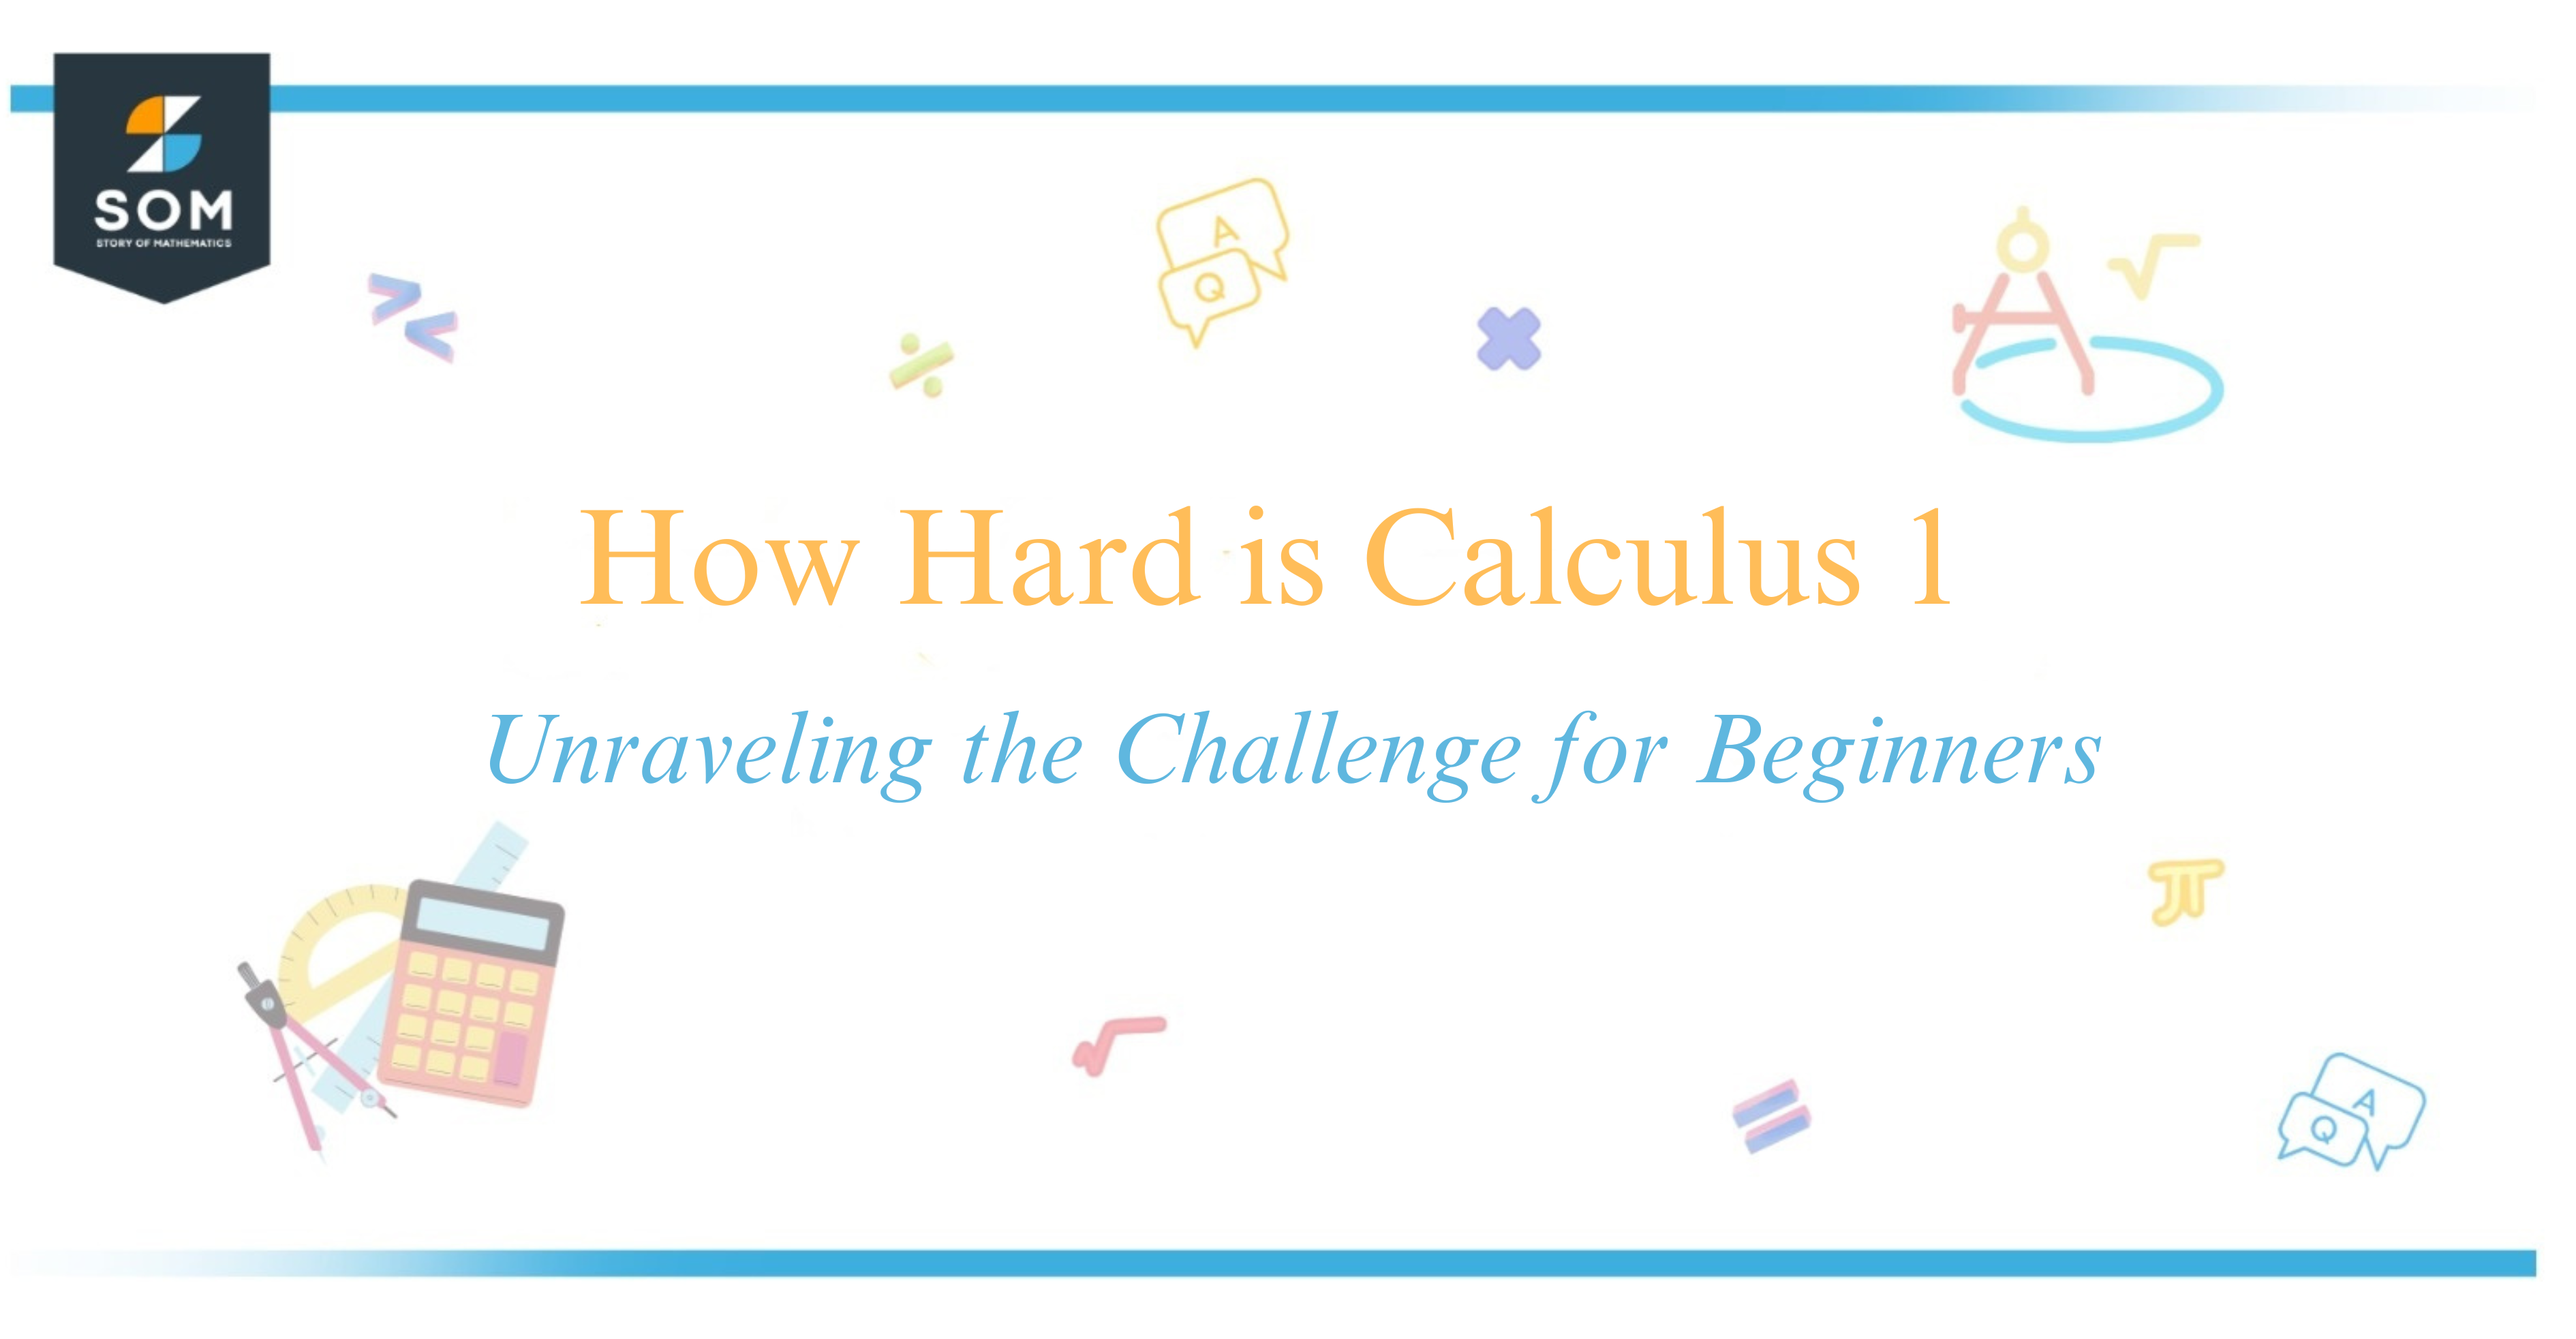 How Hard is Calculus 1 Unraveling the Challenge for Beginners